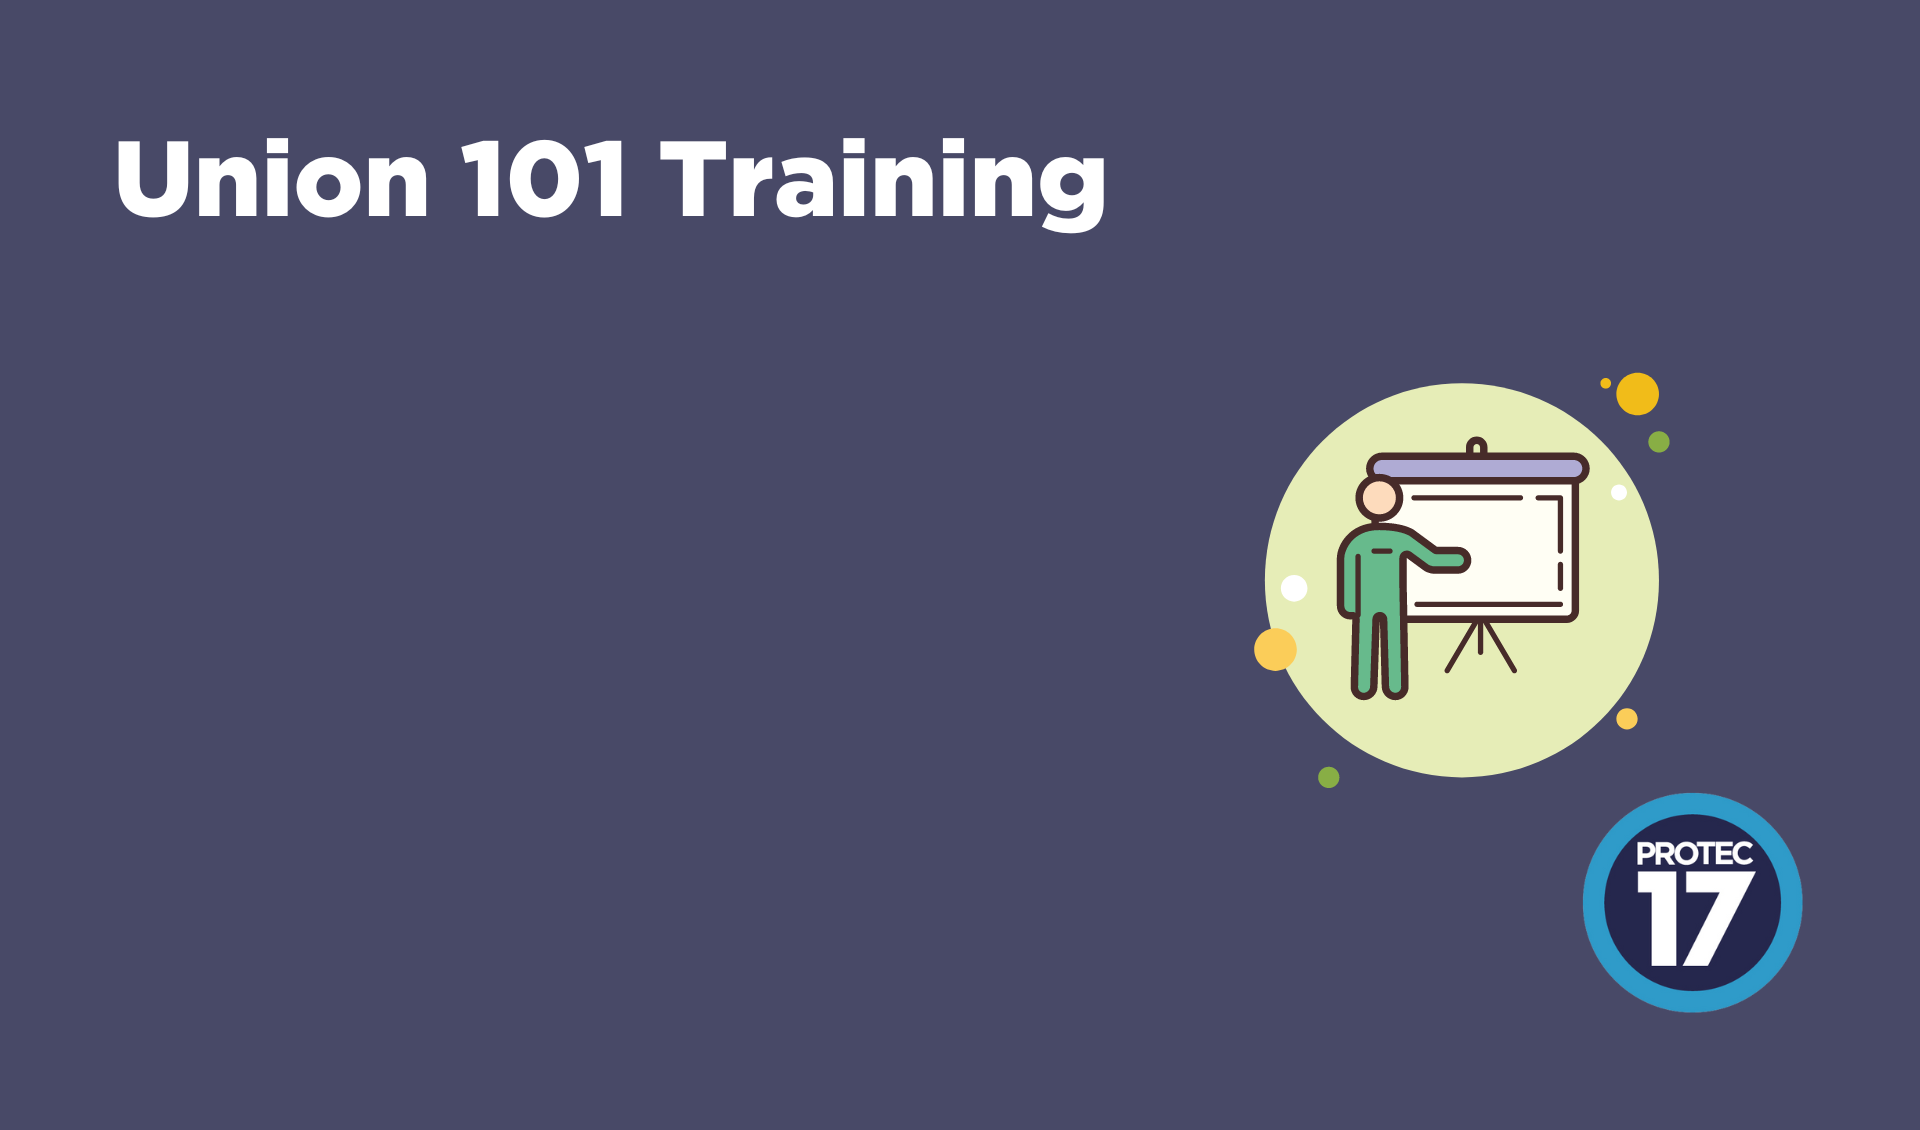 Blue banner image that says, "Union 101 Training." There is an illustrated image of someone presenting and the PROTEC17 logo on the bottom right.